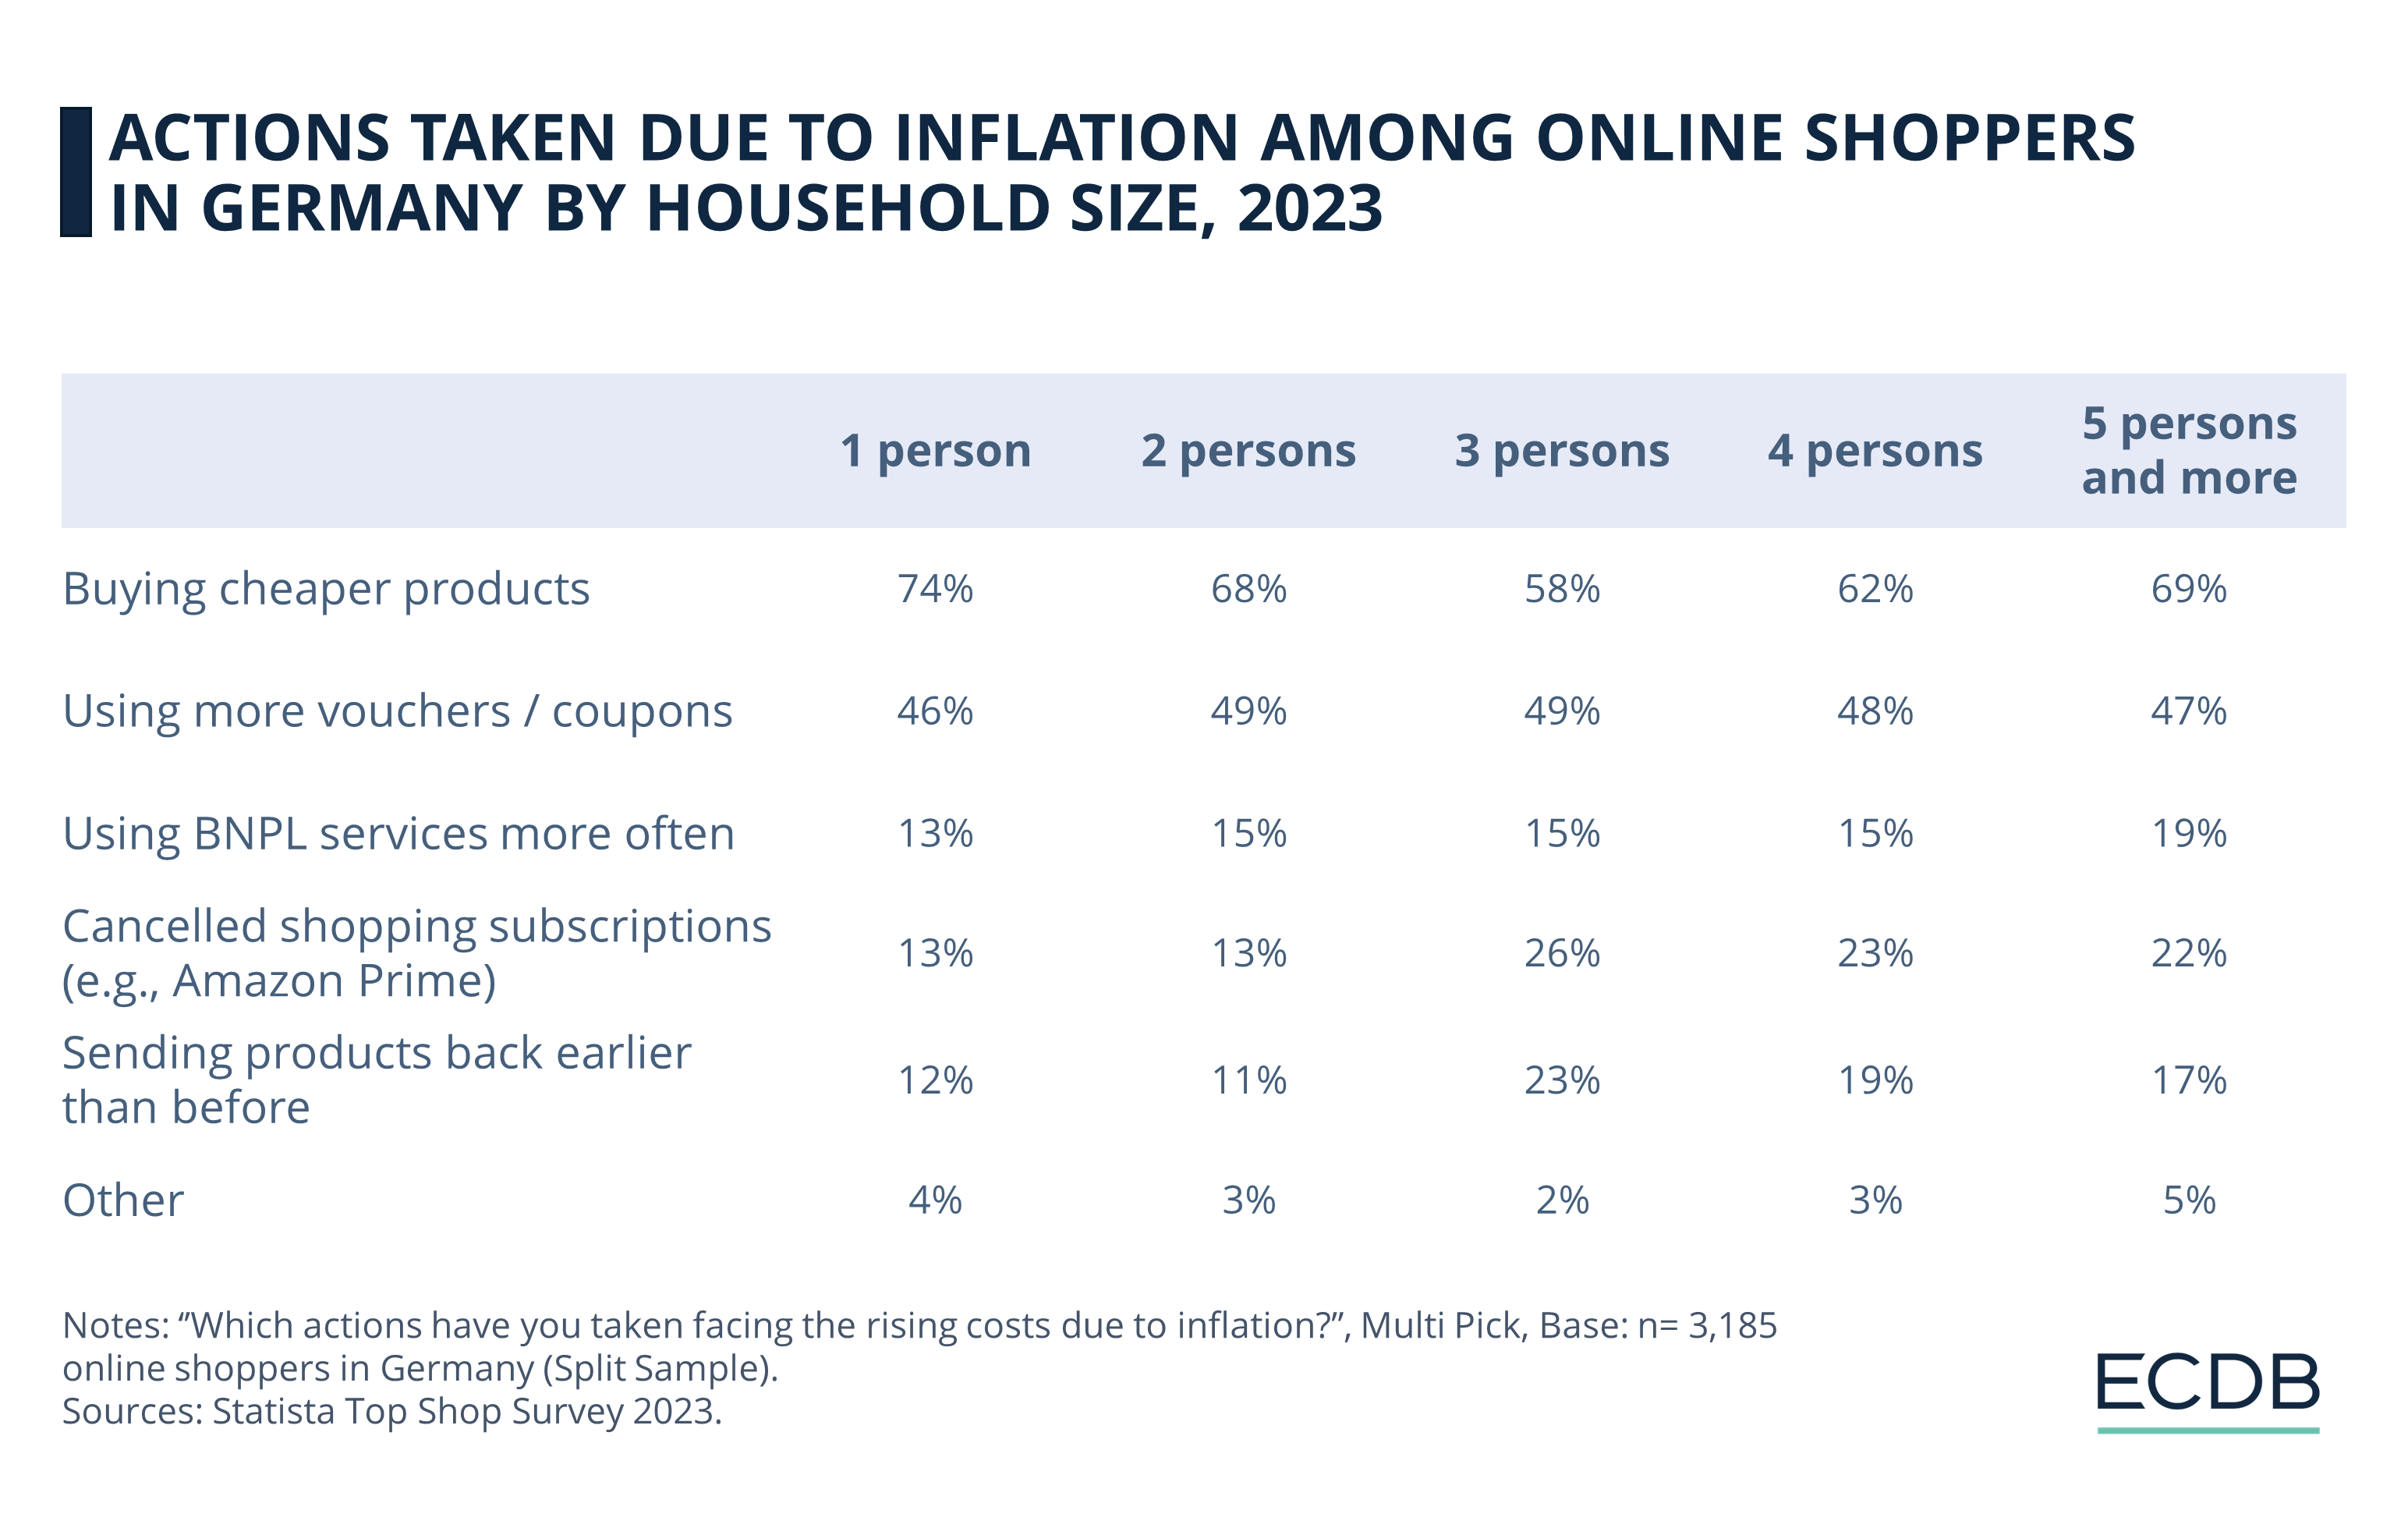 Actions Taken Due to Inflation Among Online Shoppers in Germany by Household Size, 2023